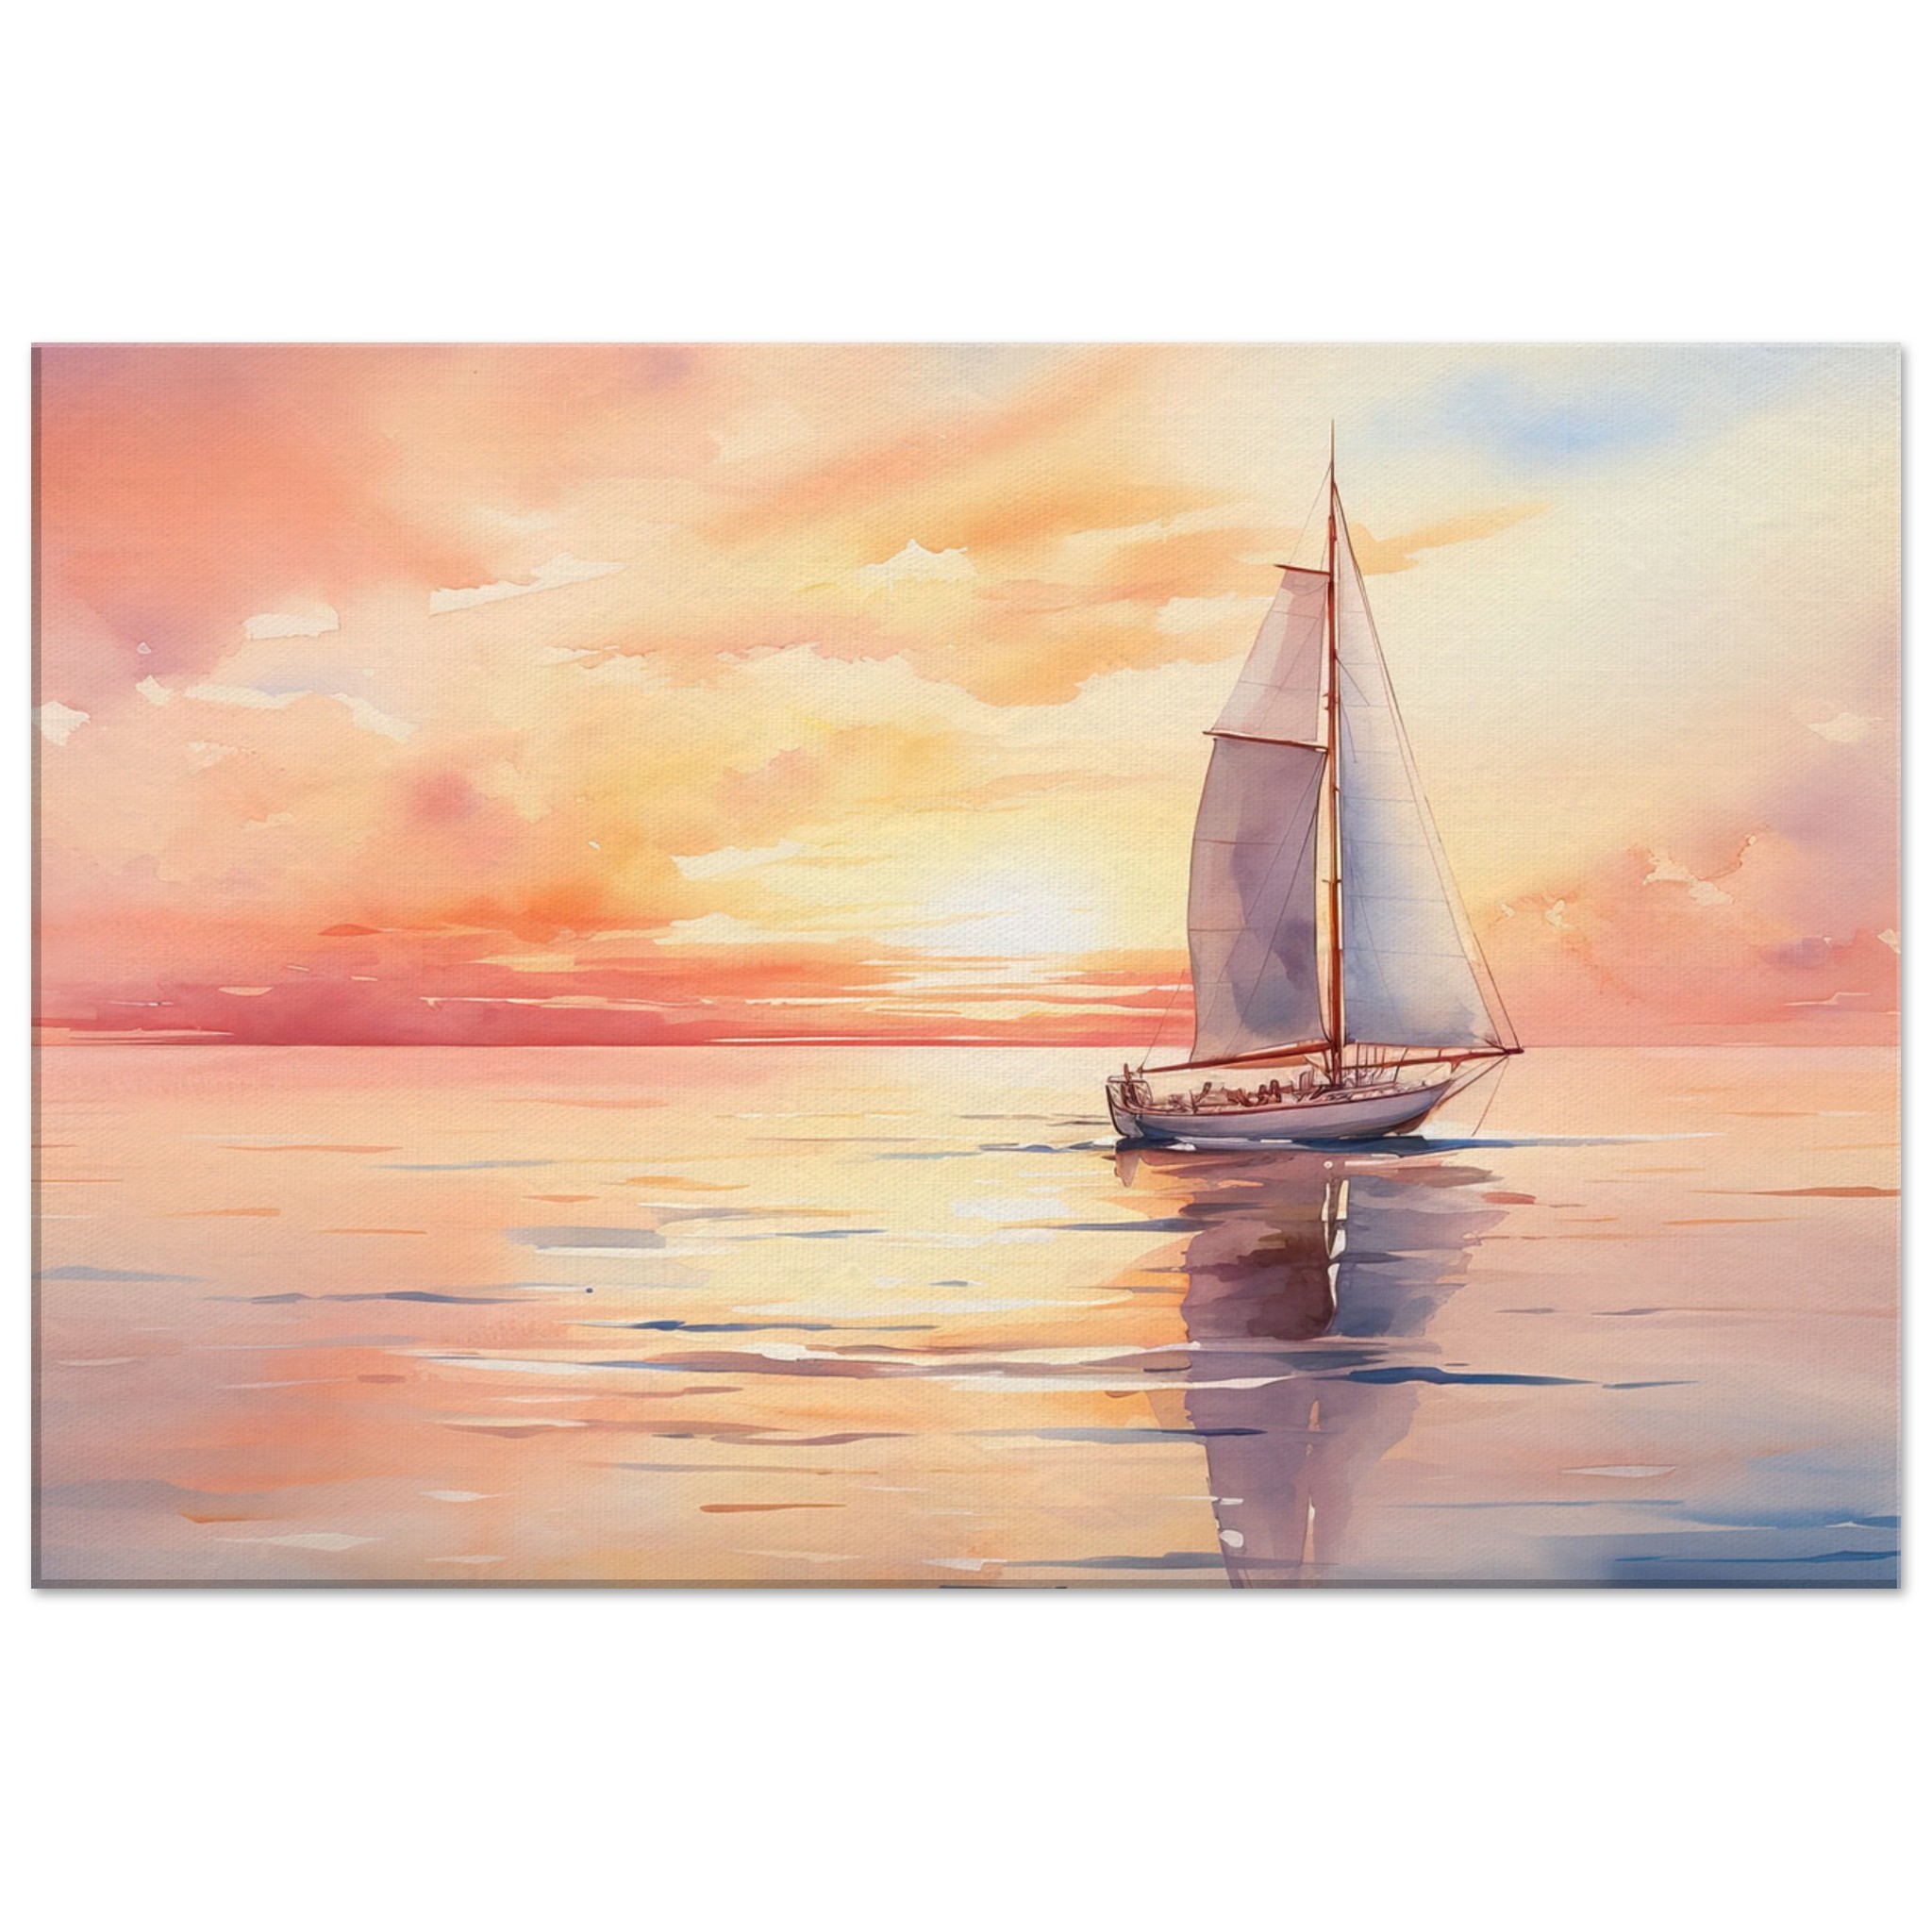 Beautiful Watercolor Sunset Sailboat Canvas Print – 50×75 cm / 20×30″, Thick